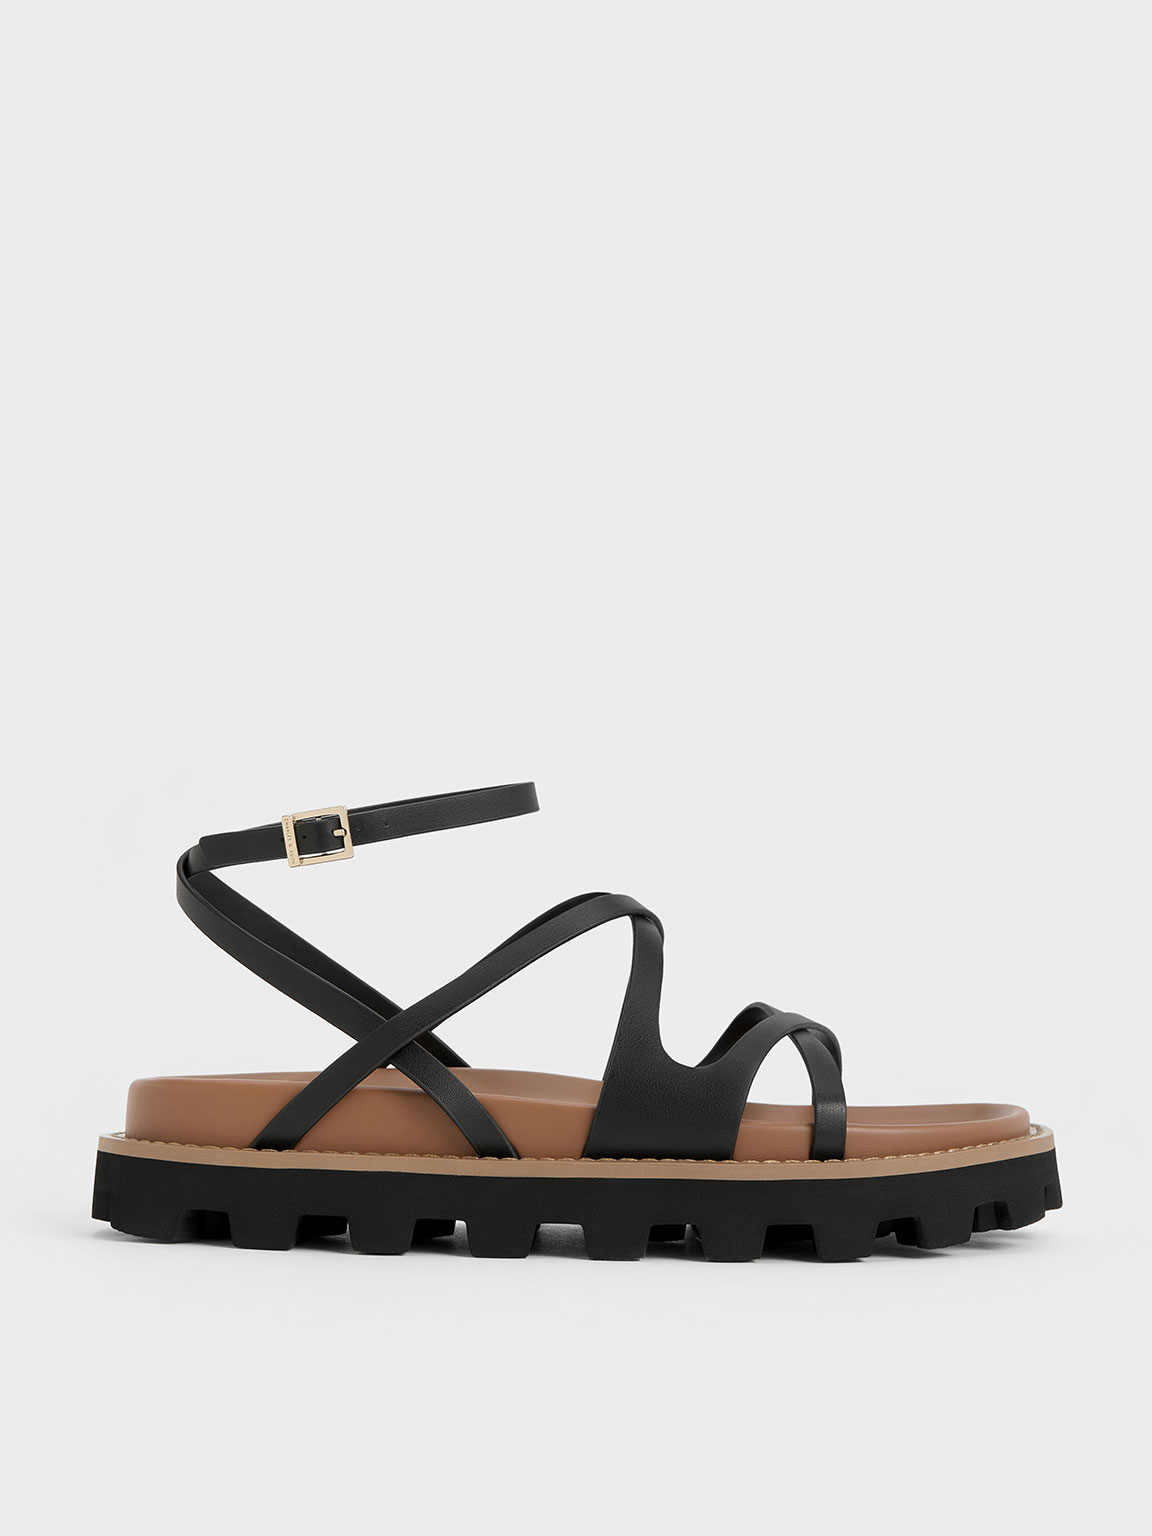 Black Crossover Ankle-Strap Sandals | CHARLES u0026 KEITH